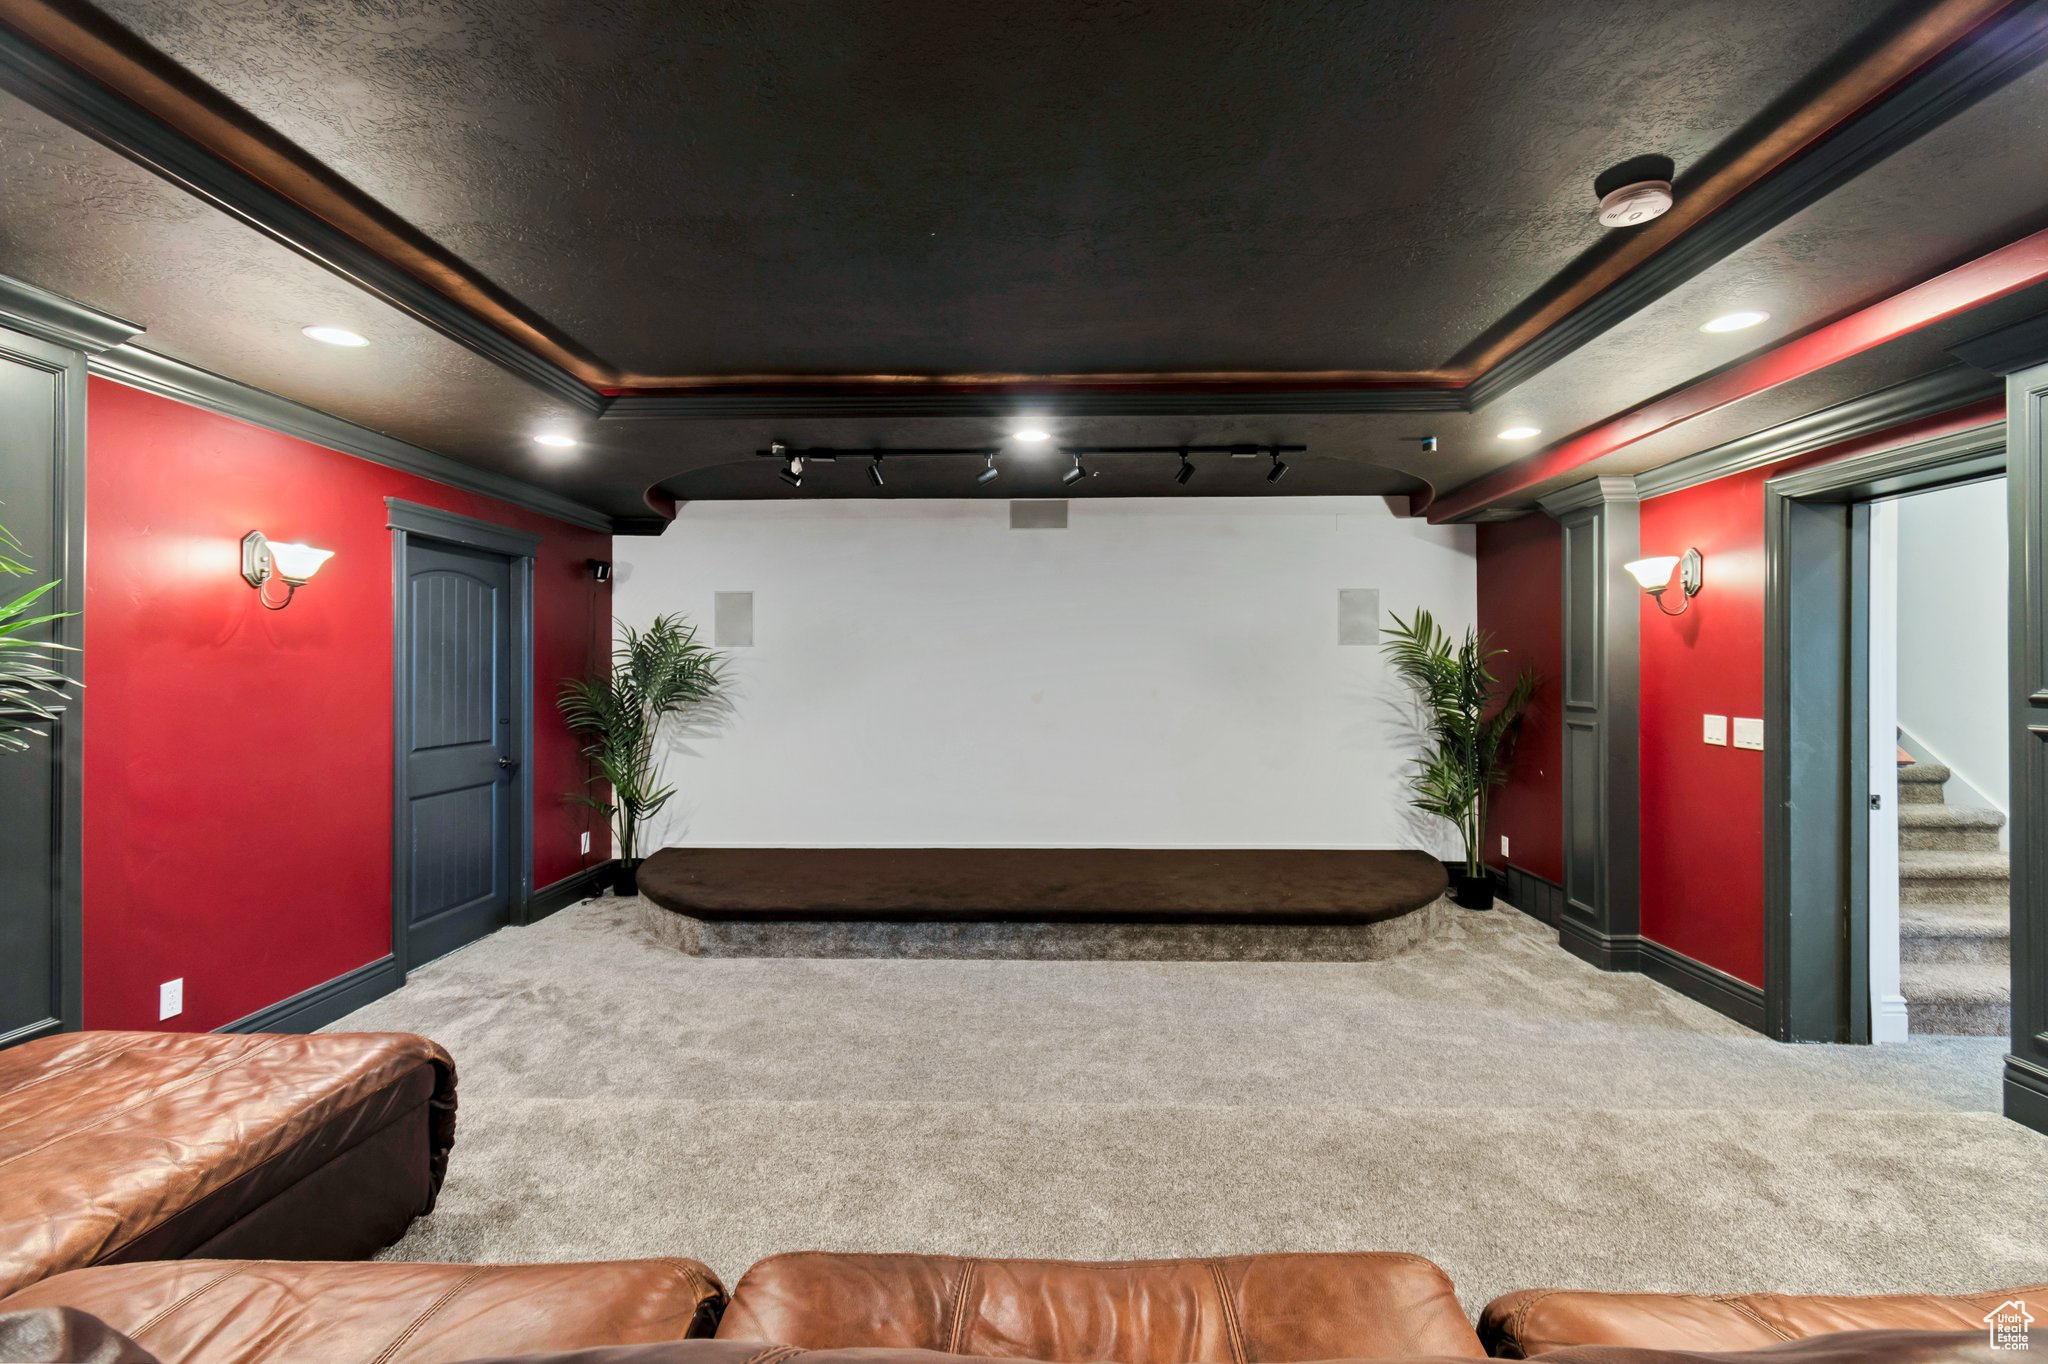 Home theater room with carpet flooring, crown molding, and a raised ceiling